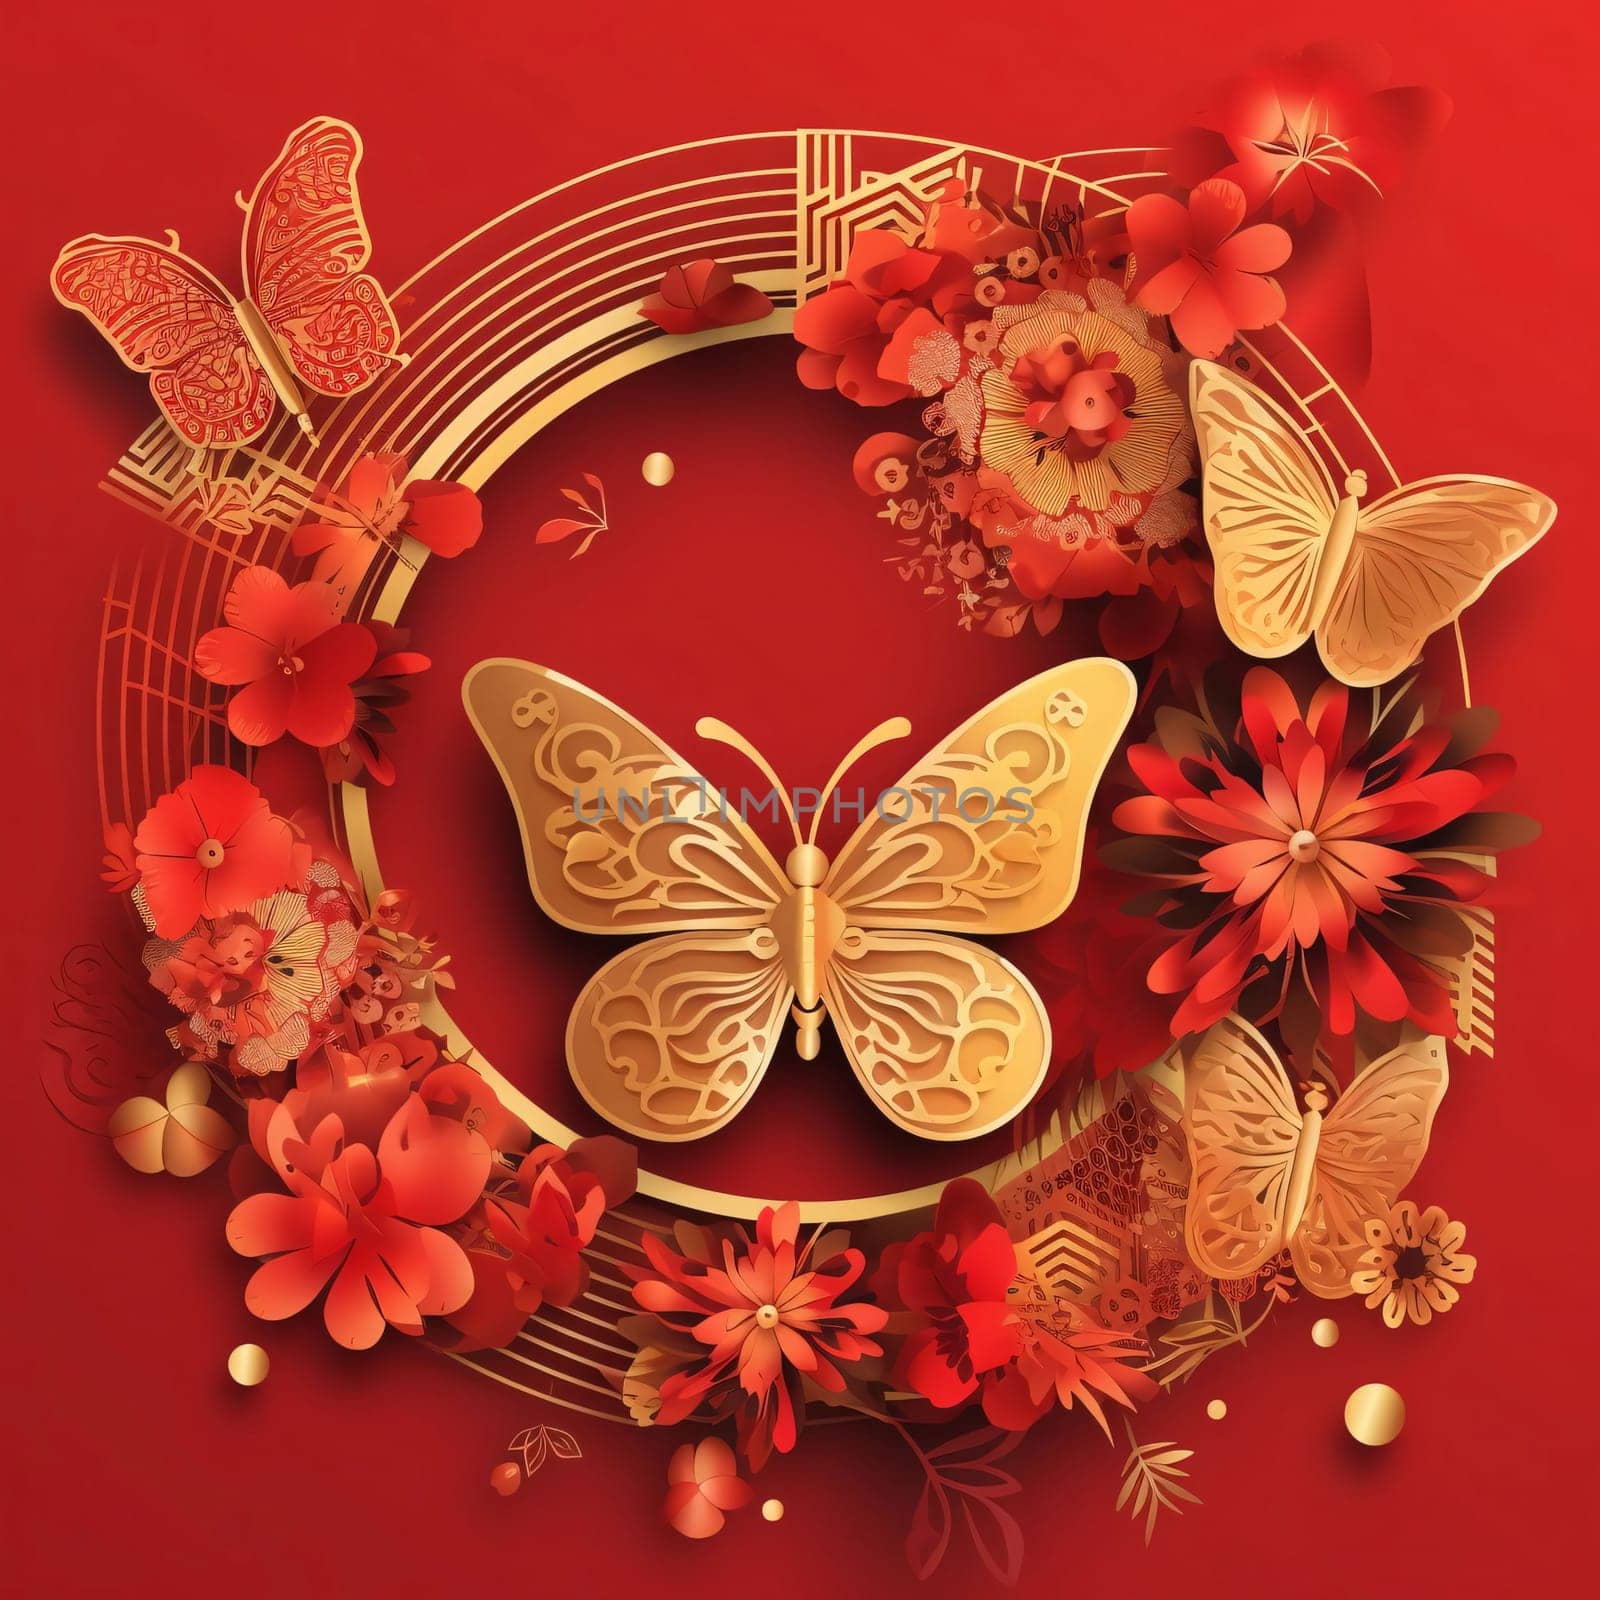 Gold butterflies in a circle decoration with red flowers, red background. Chinese New Year celebrations. by ThemesS